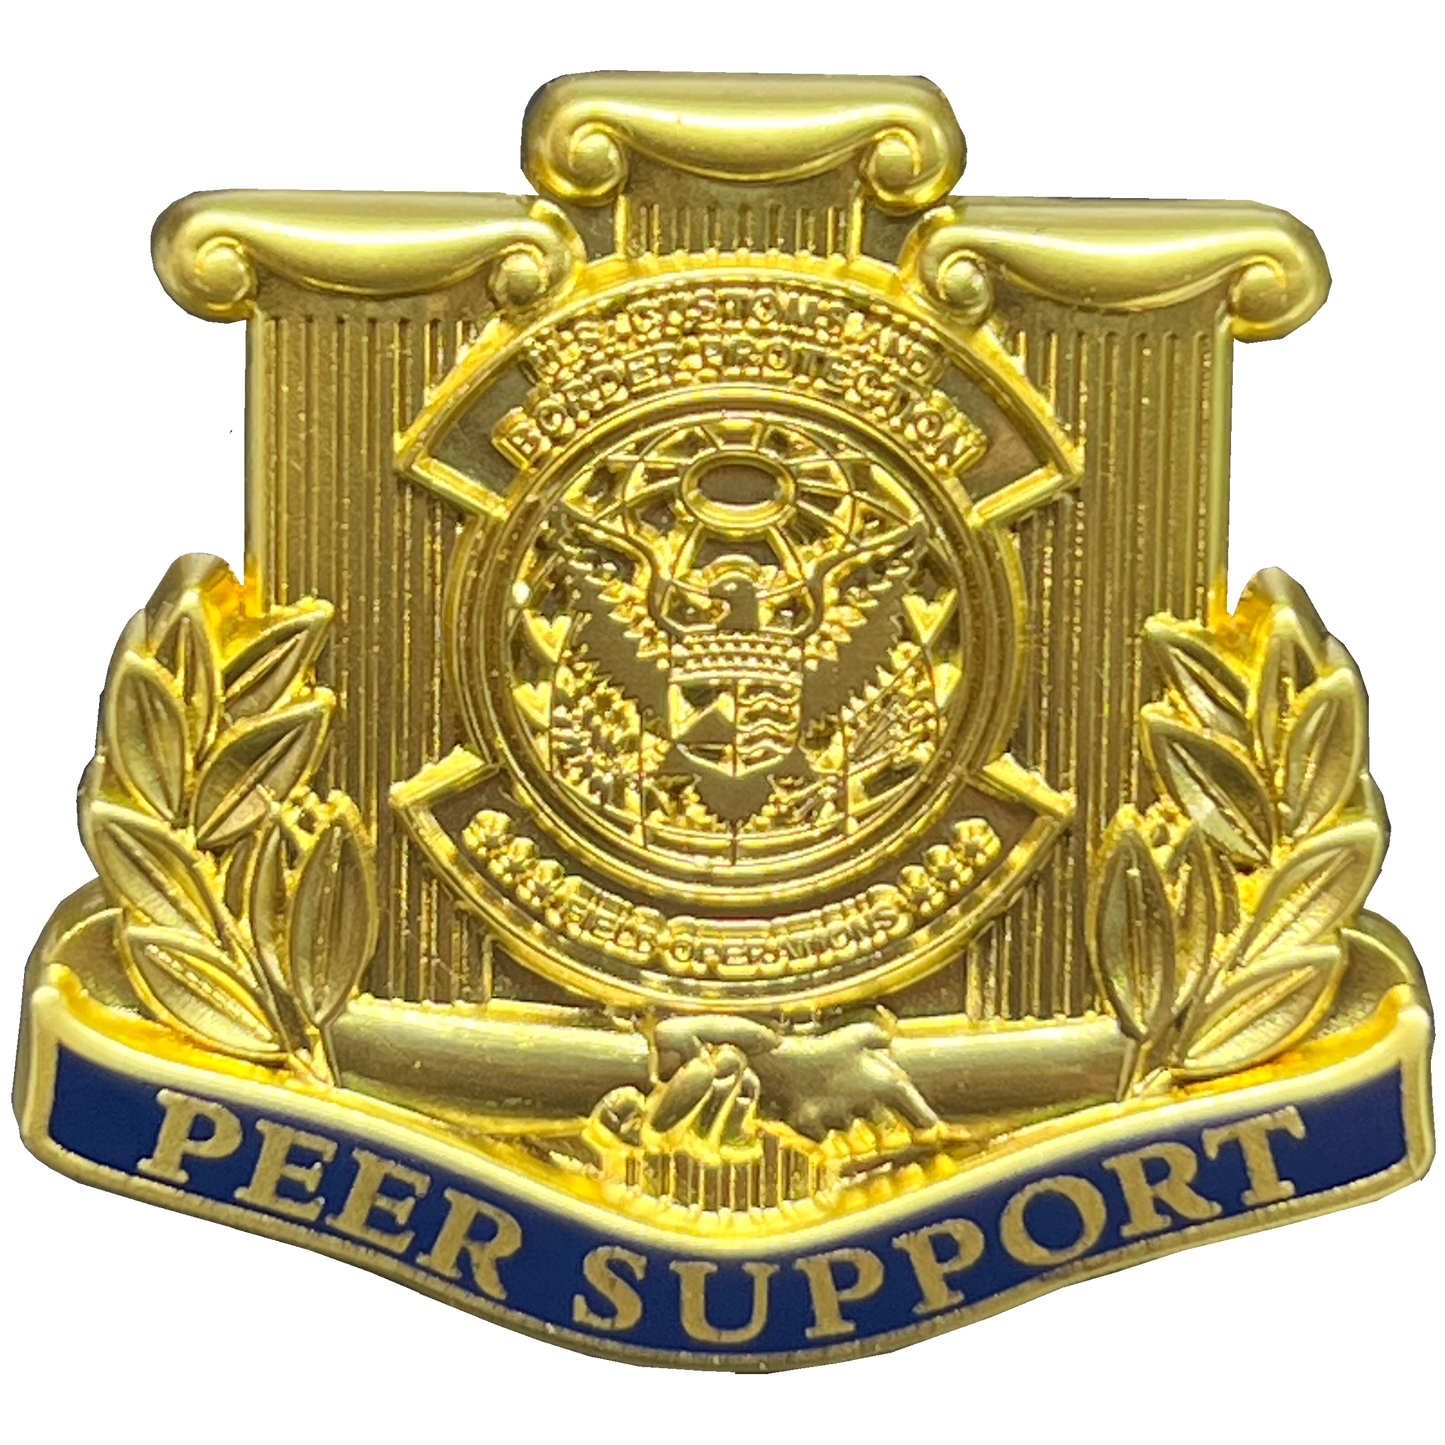 EL13-011 CBP Peer Support Officer US Customs and Border Protection CBPO uniform Agriculture Specialist